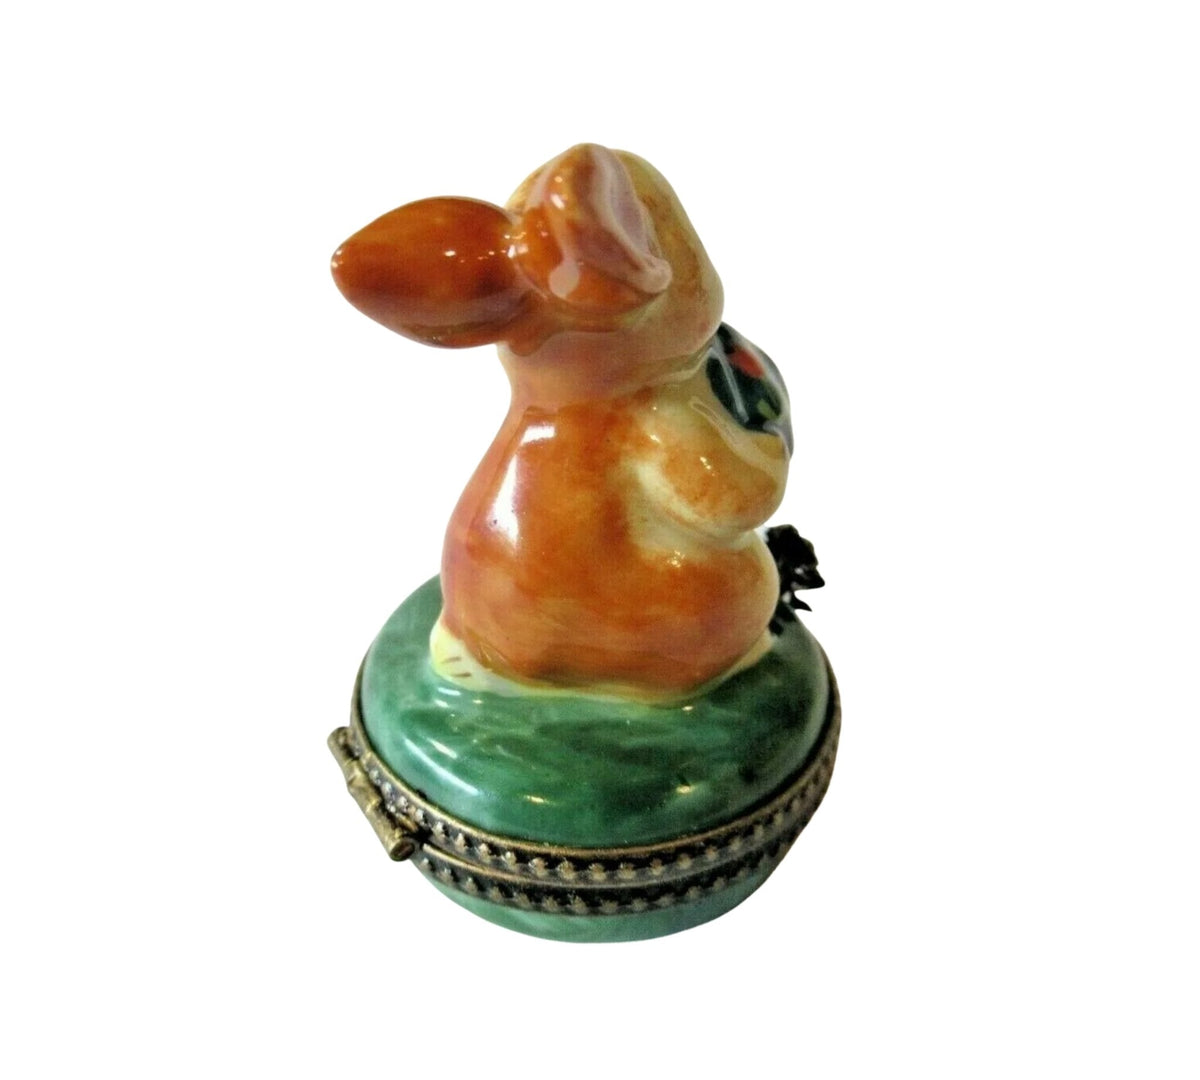 Whimsical garden ornament featuring a rabbit and water can